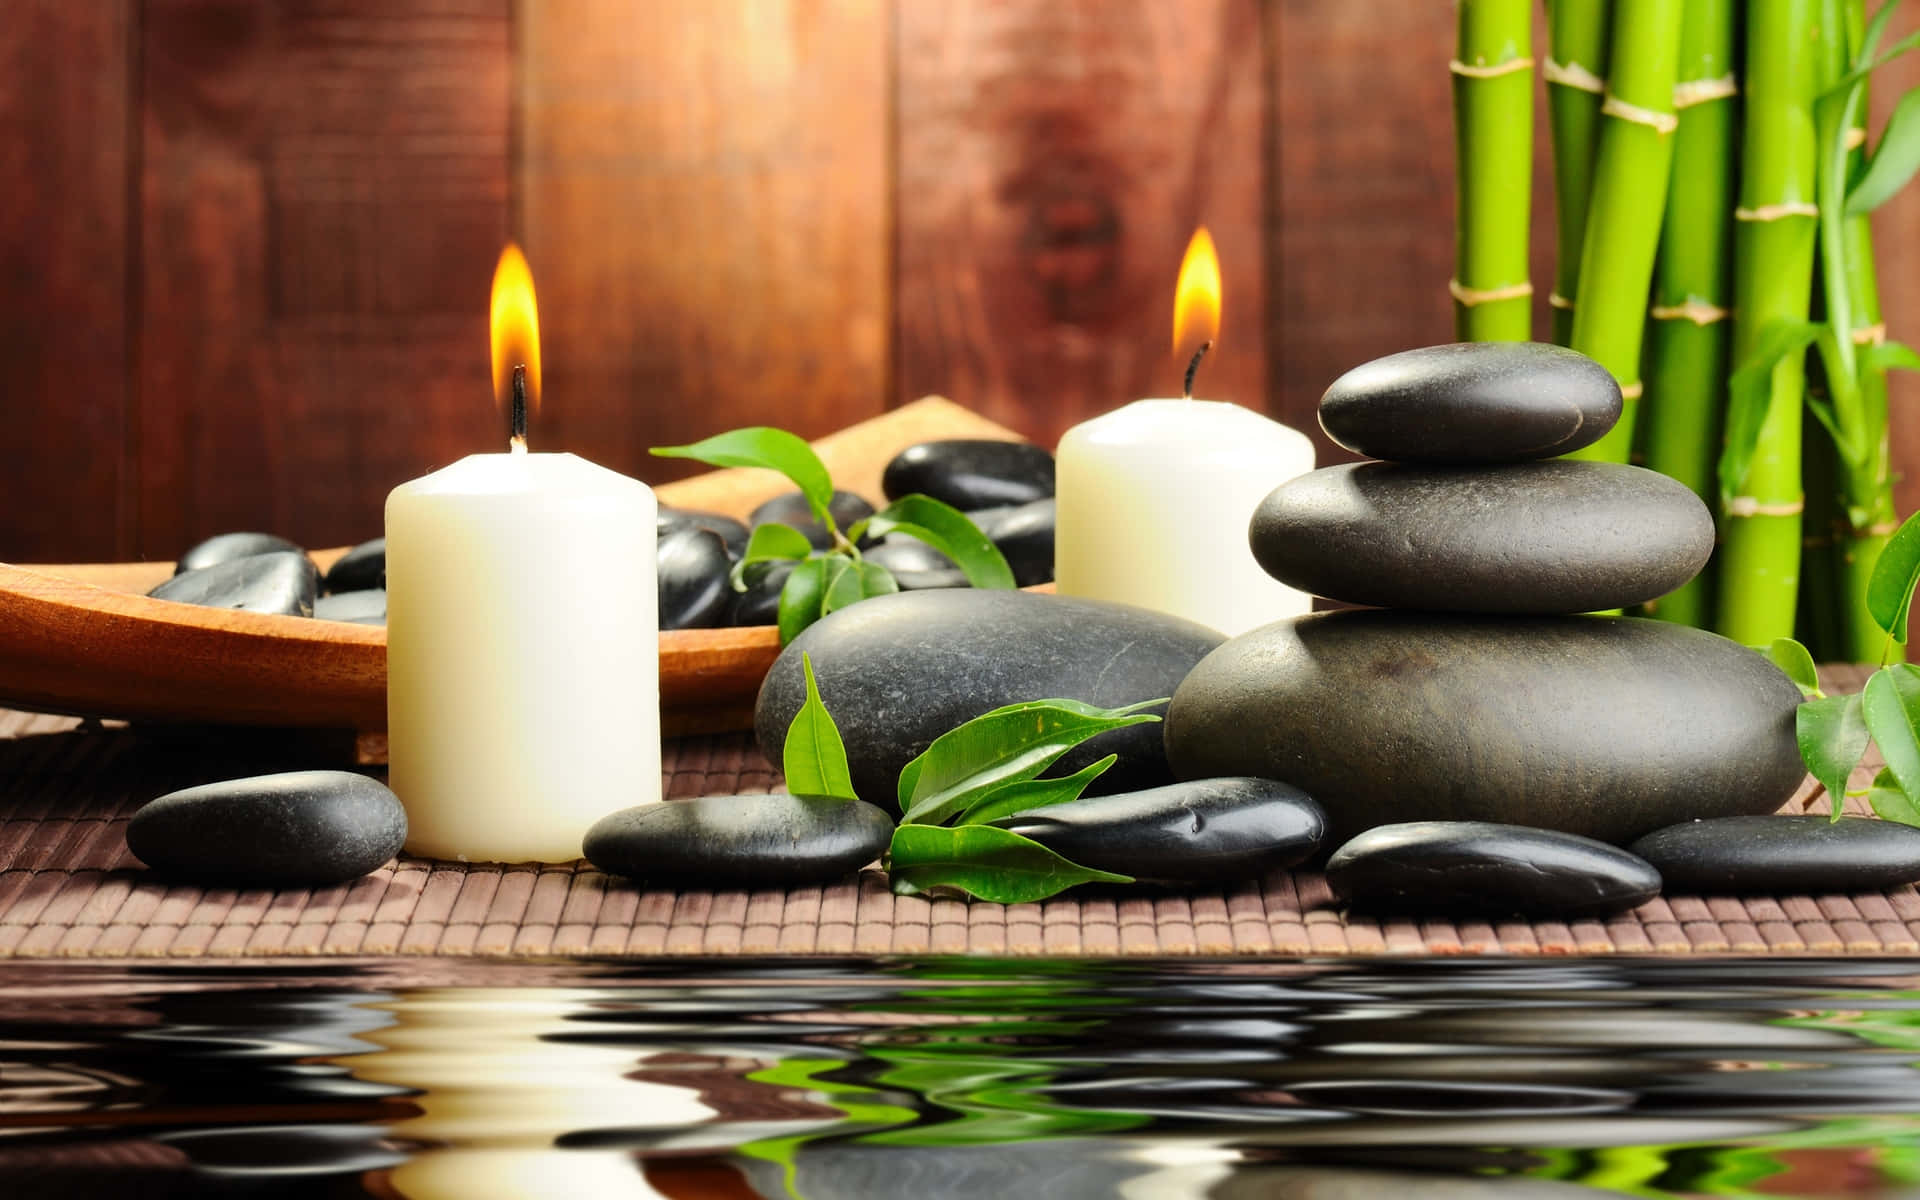 Calming Spa Atmosphere of Candles and Orchid Flowers